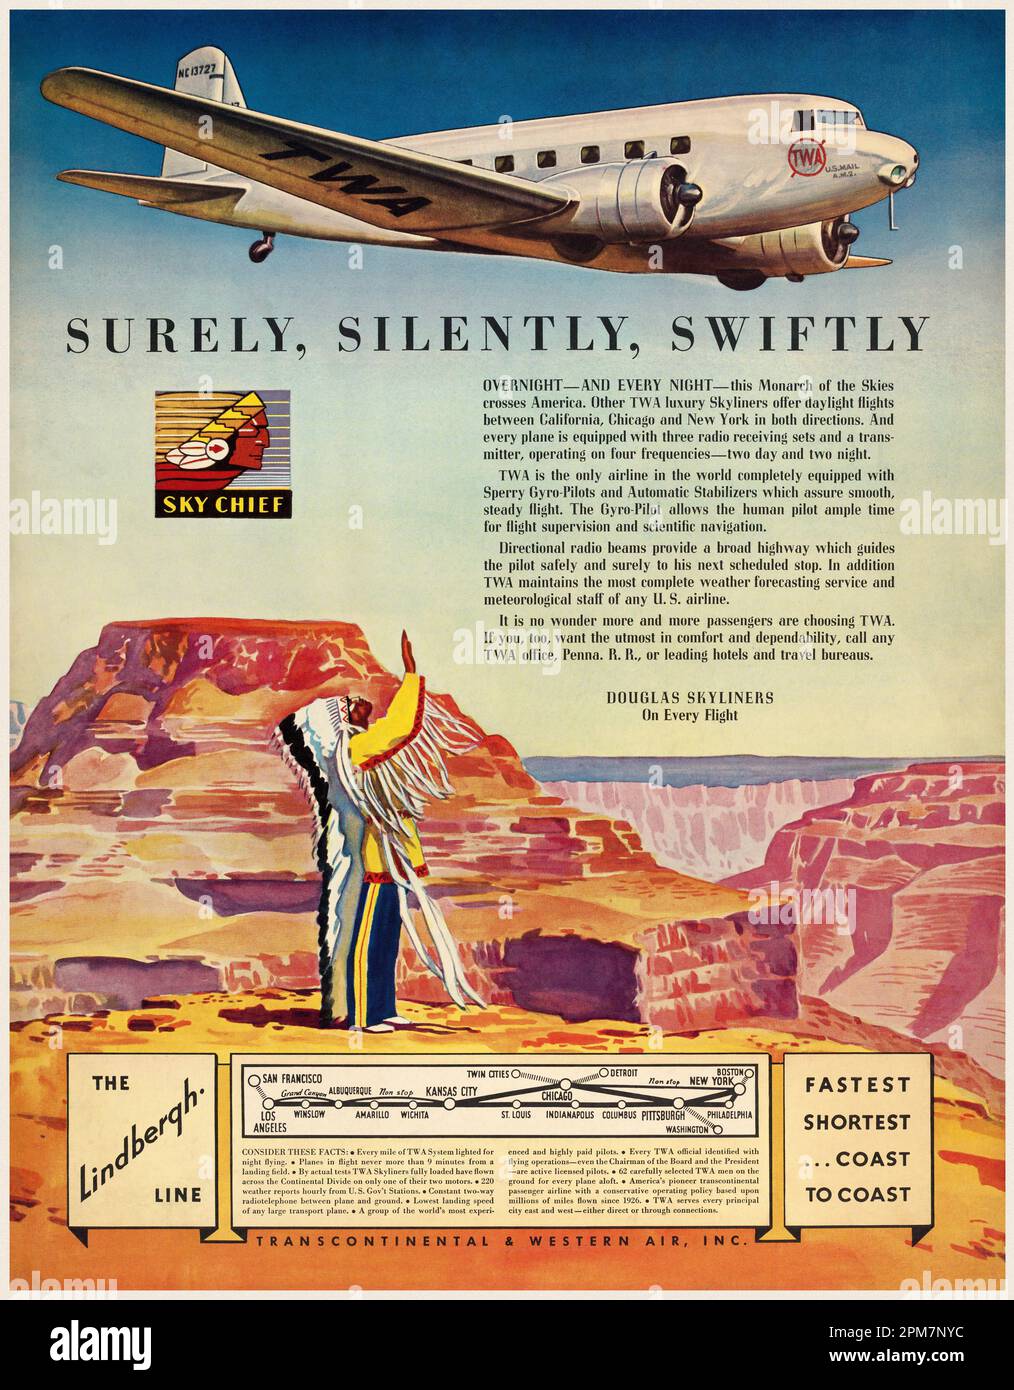 The Lindbergh Line. Surely, Silently, Swiftly. Artist unknown. Poster published in 1935 in the USA. Stock Photo